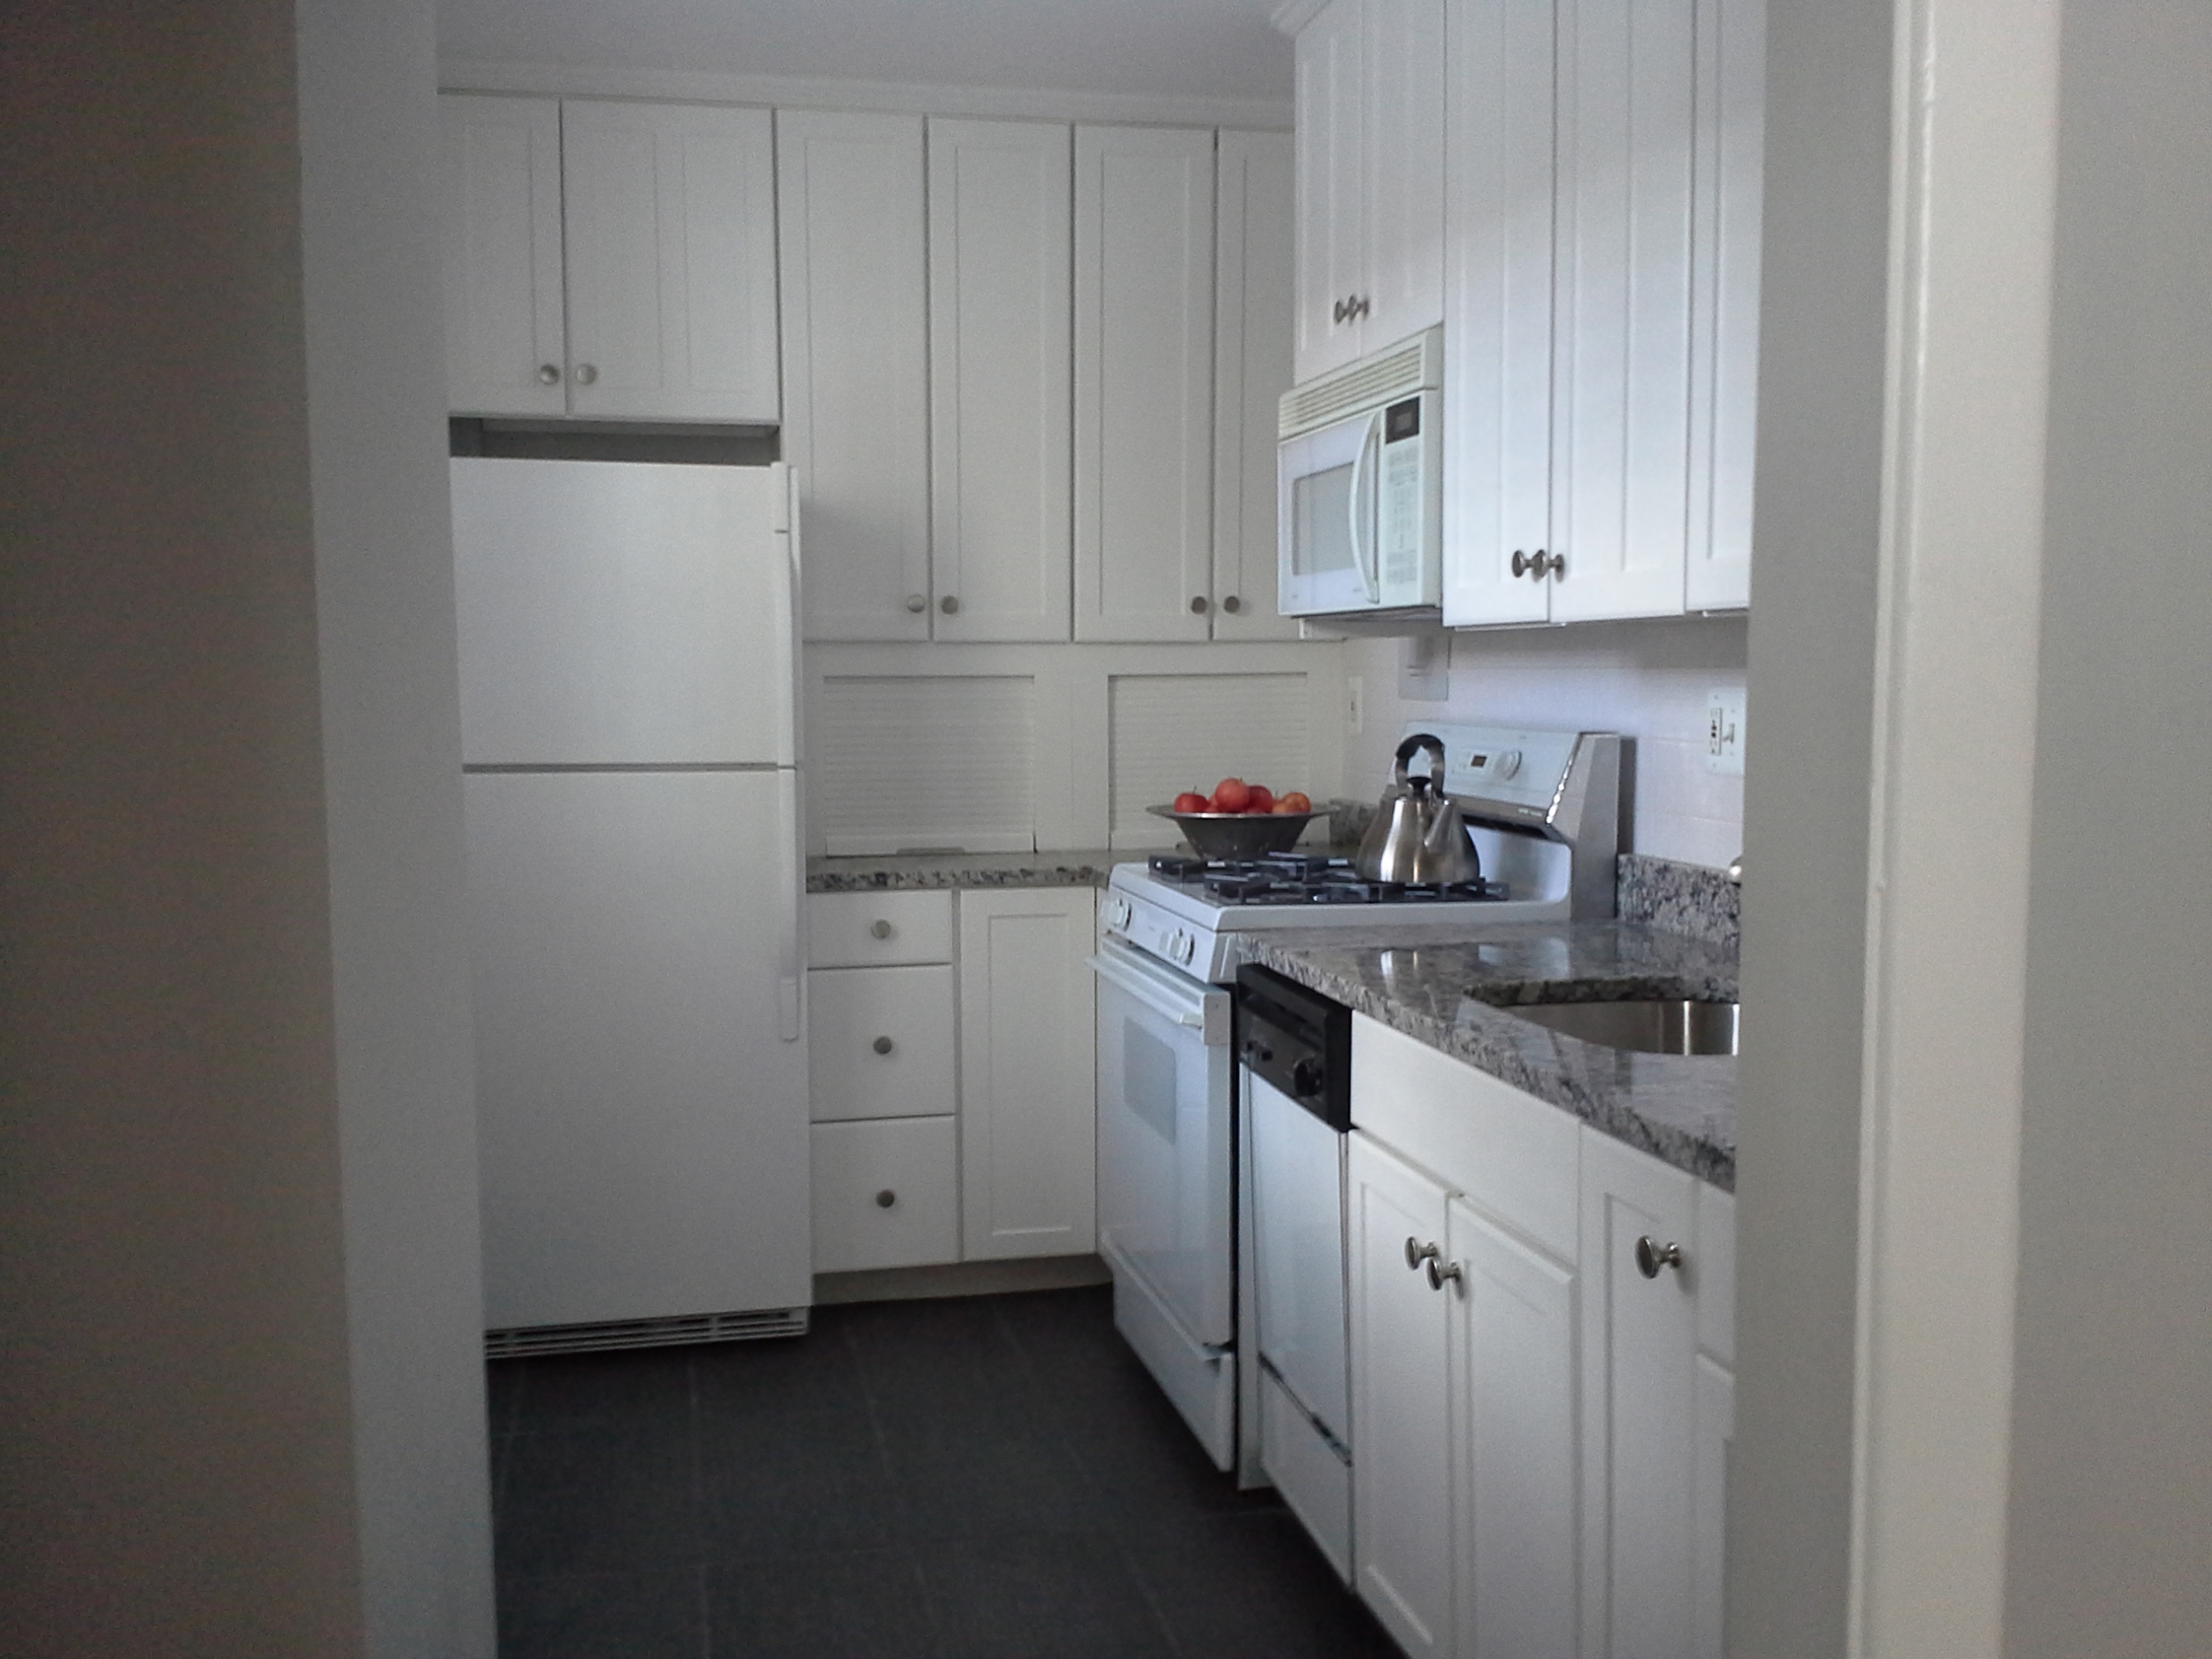 We locate all kitchen cabinets and appliances including refrigerators, sinks, islands and stoves.